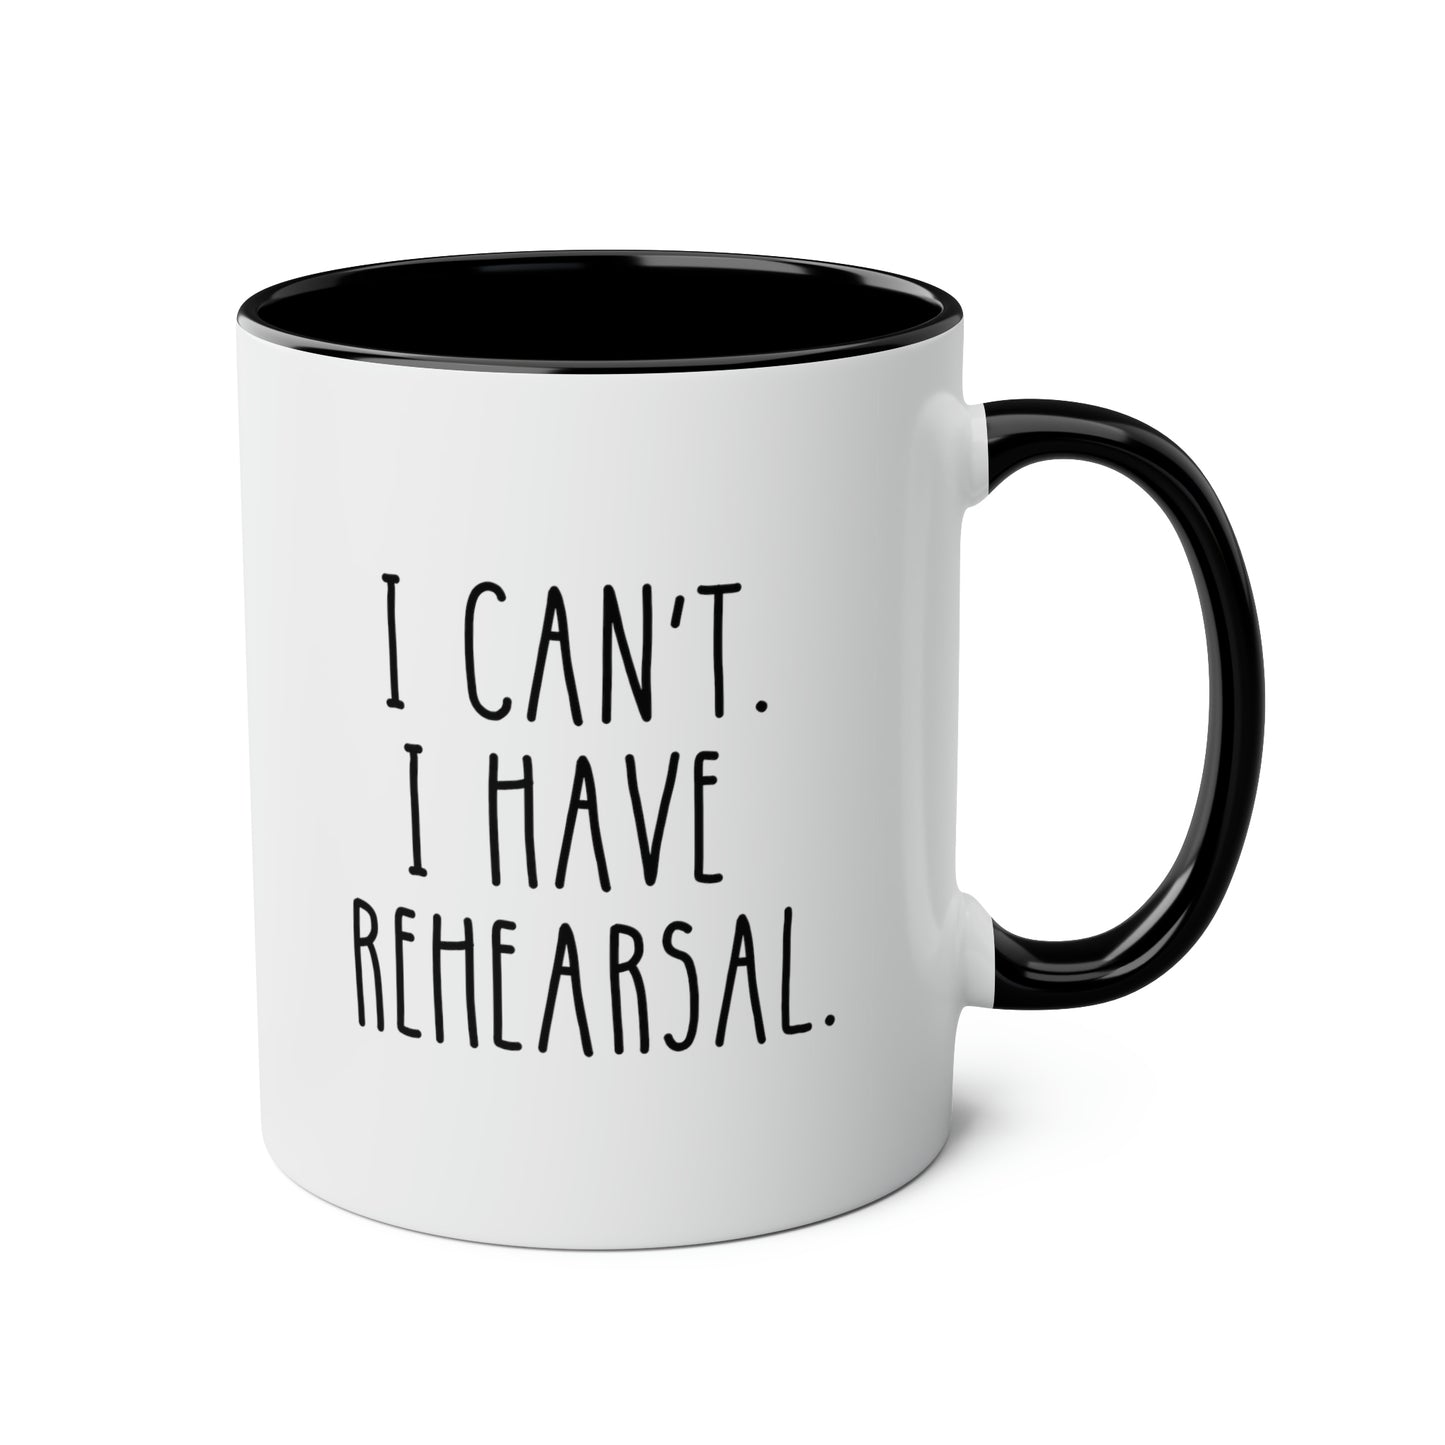 I Can't. I Have Rehearsal. 11oz white with black accent funny large coffee mug gift for theater actor actress dancer band singer waveywares wavey wares wavywares wavy wares